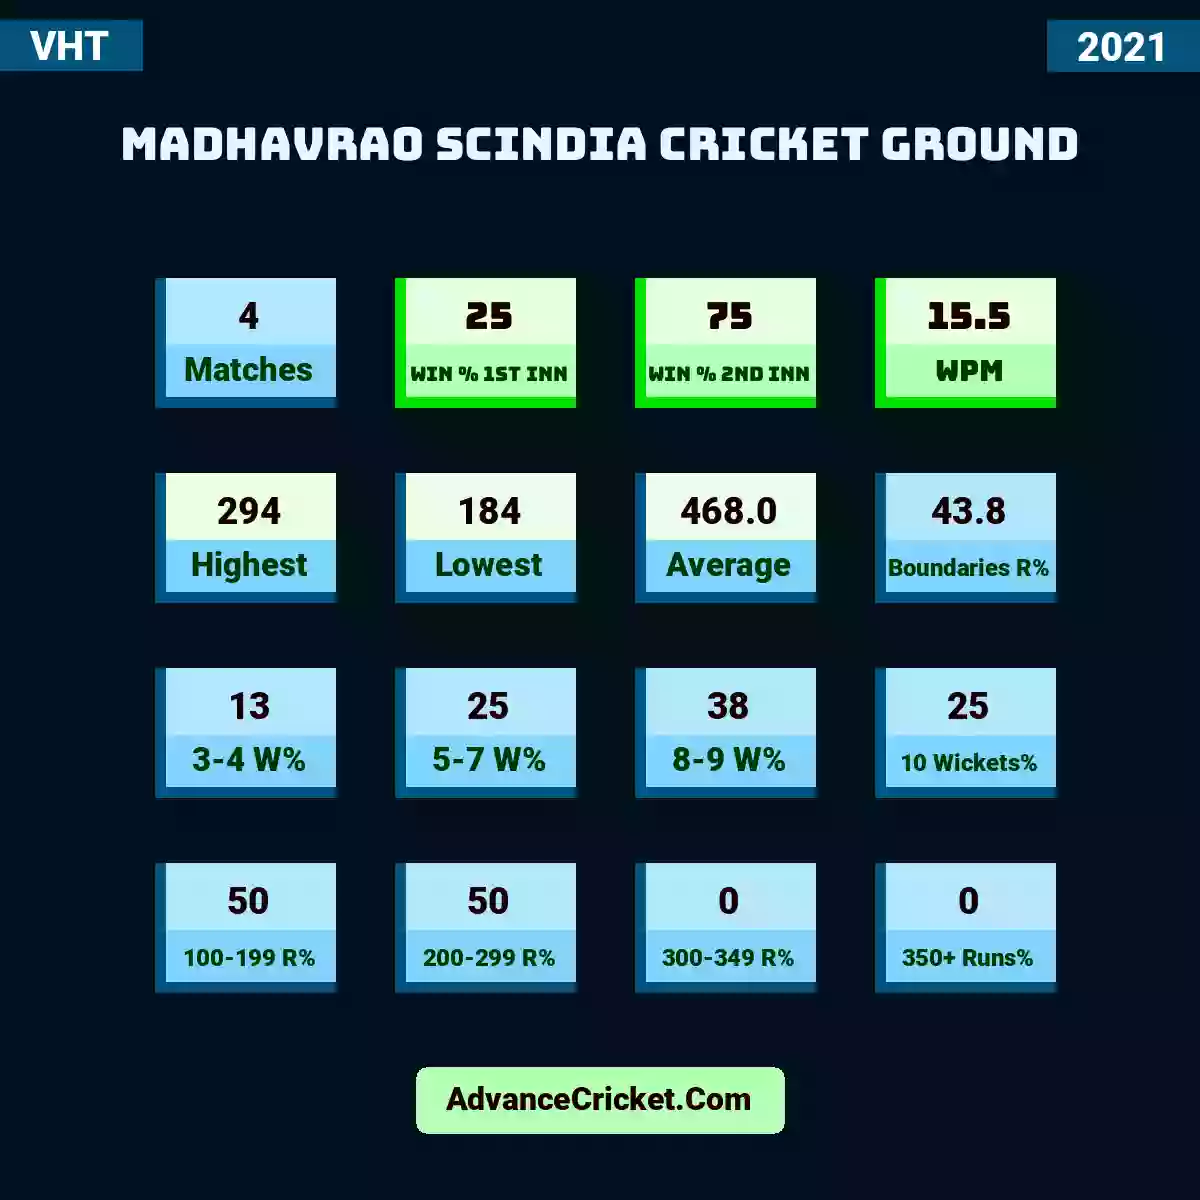 Image showing Madhavrao Scindia Cricket Ground with Matches: 4, Win % 1st Inn: 25, Win % 2nd Inn: 75, WPM: 15.5, Highest: 294, Lowest: 184, Average: 468.0, Boundaries R%: 43.8, 3-4 W%: 13, 5-7 W%: 25, 8-9 W%: 38, 10 Wickets%: 25, 100-199 R%: 50, 200-299 R%: 50, 300-349 R%: 0, 350+ Runs%: 0.